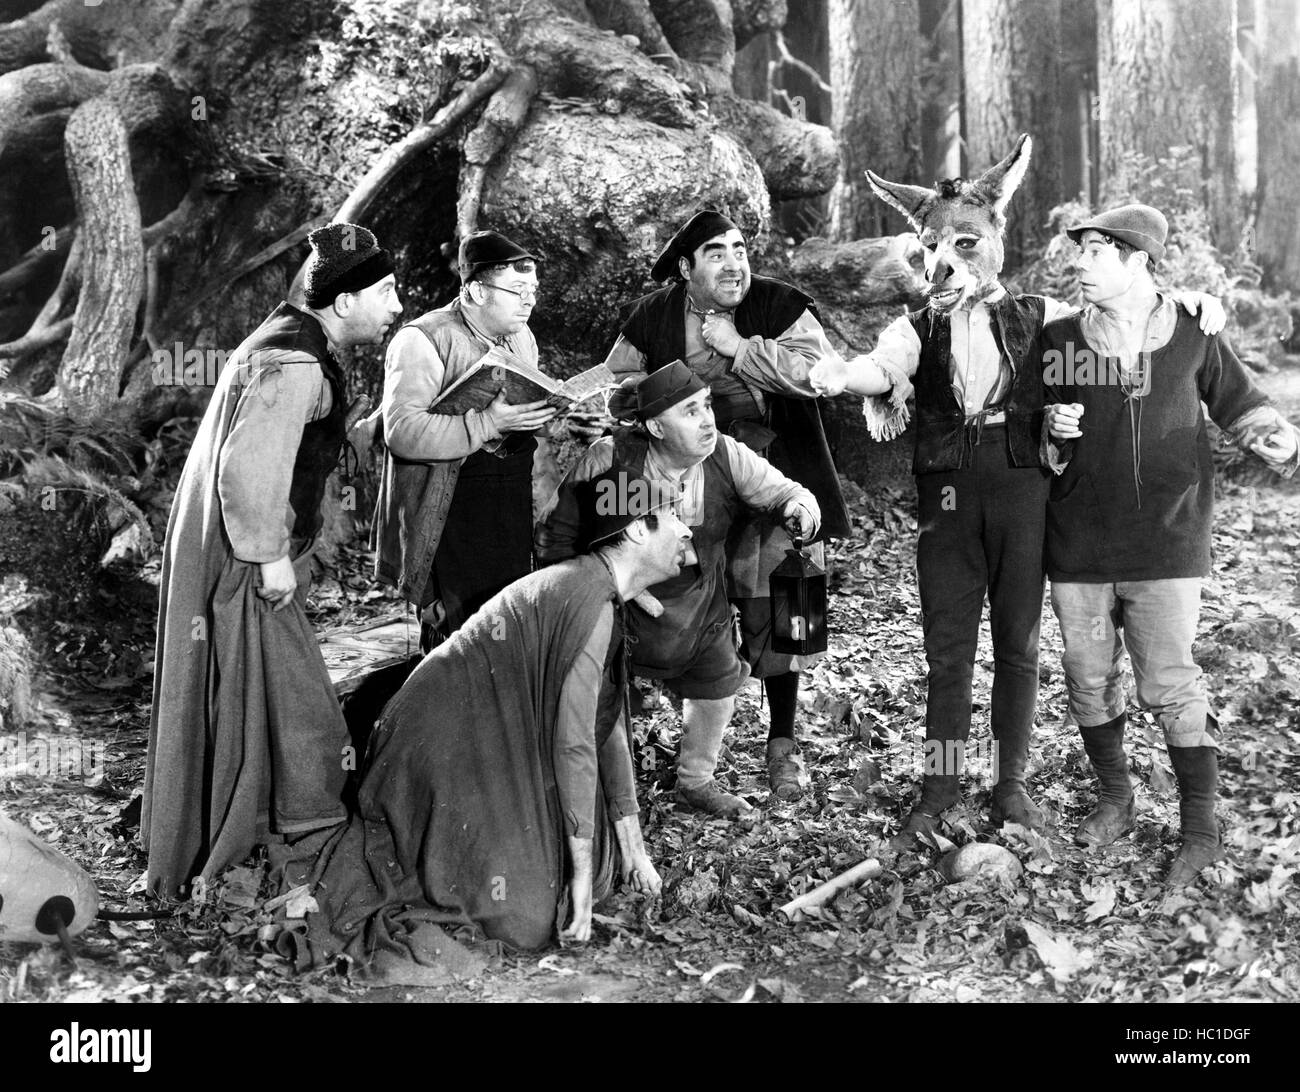 A MIDSUMMER NIGHT'S DREAM, James Cagney (with donkey head) and Joe E ...